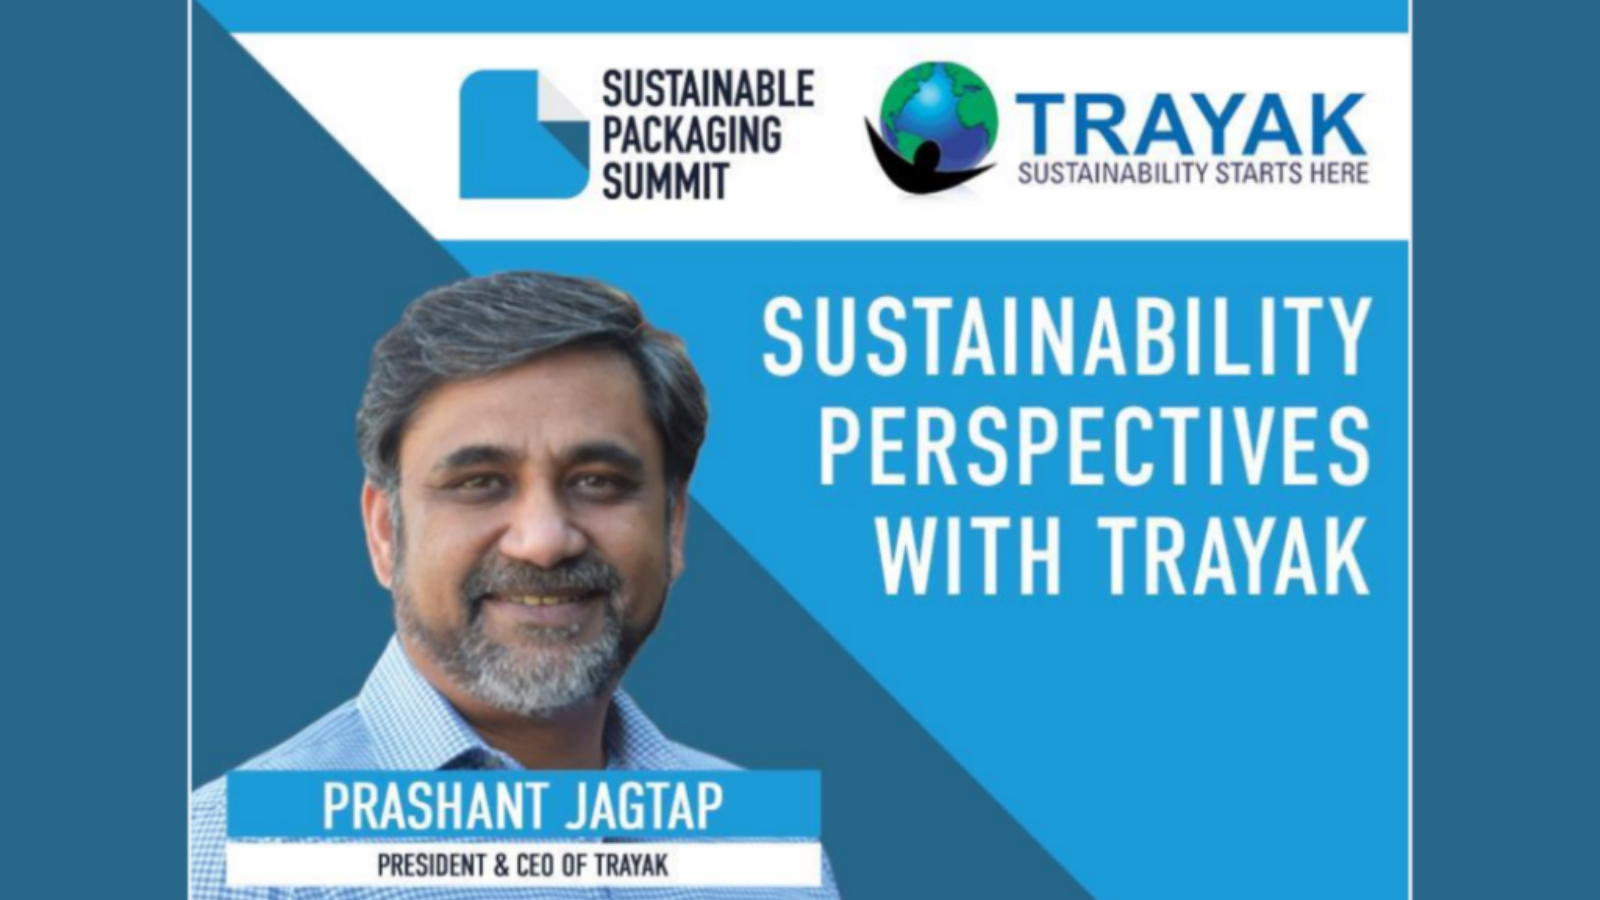 Trayak President and CEO Prashant Jagtap recently discussed sustainability journeys with Packaging Europe.